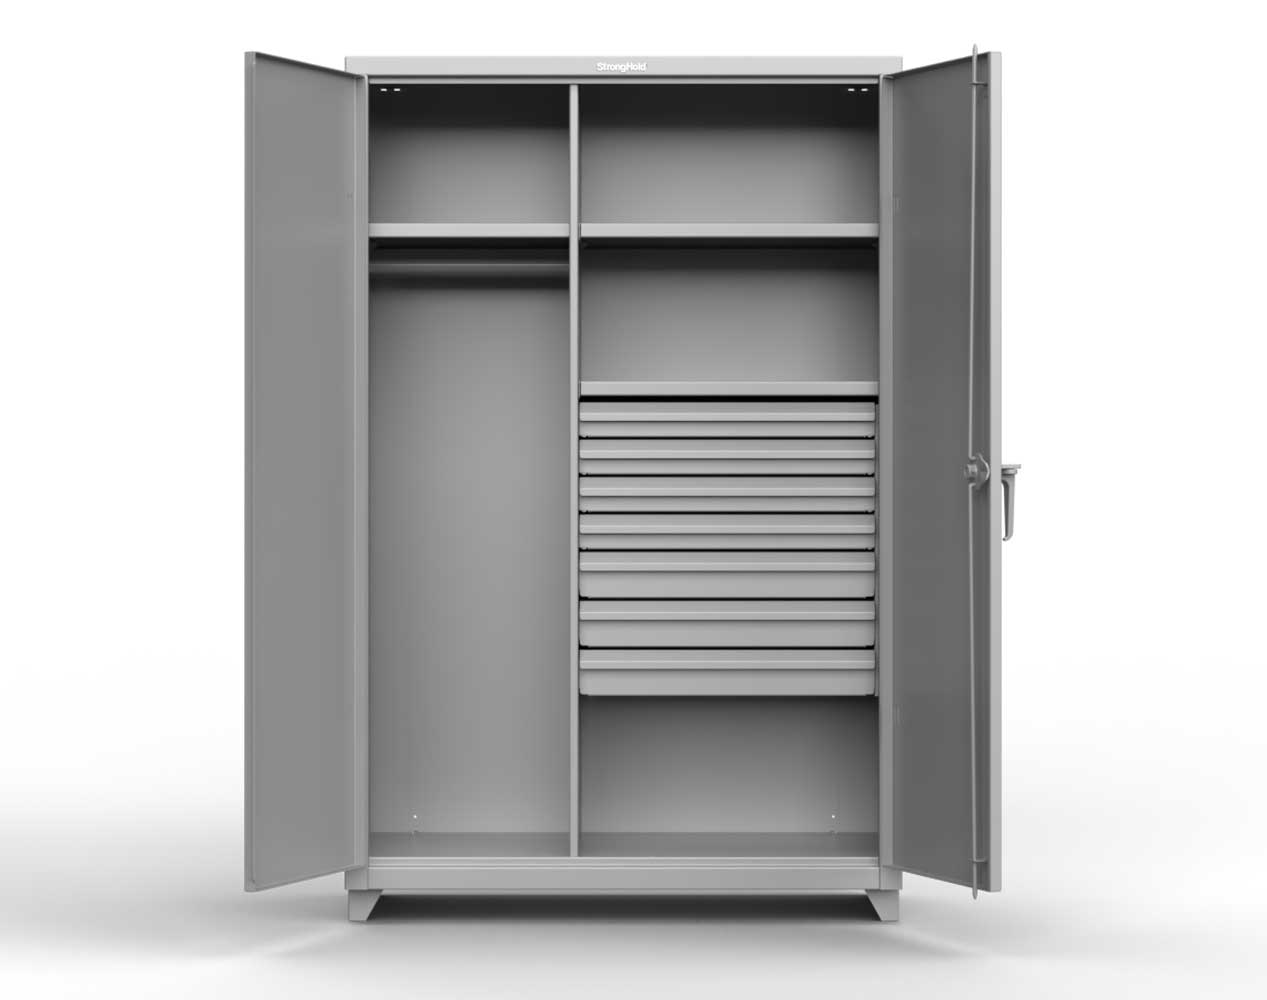 Extra Heavy Duty 14 GA Uniform Cabinet with 7 Drawers, 3 Shelves - 48 In. W x 24 In. D x 75 In. H